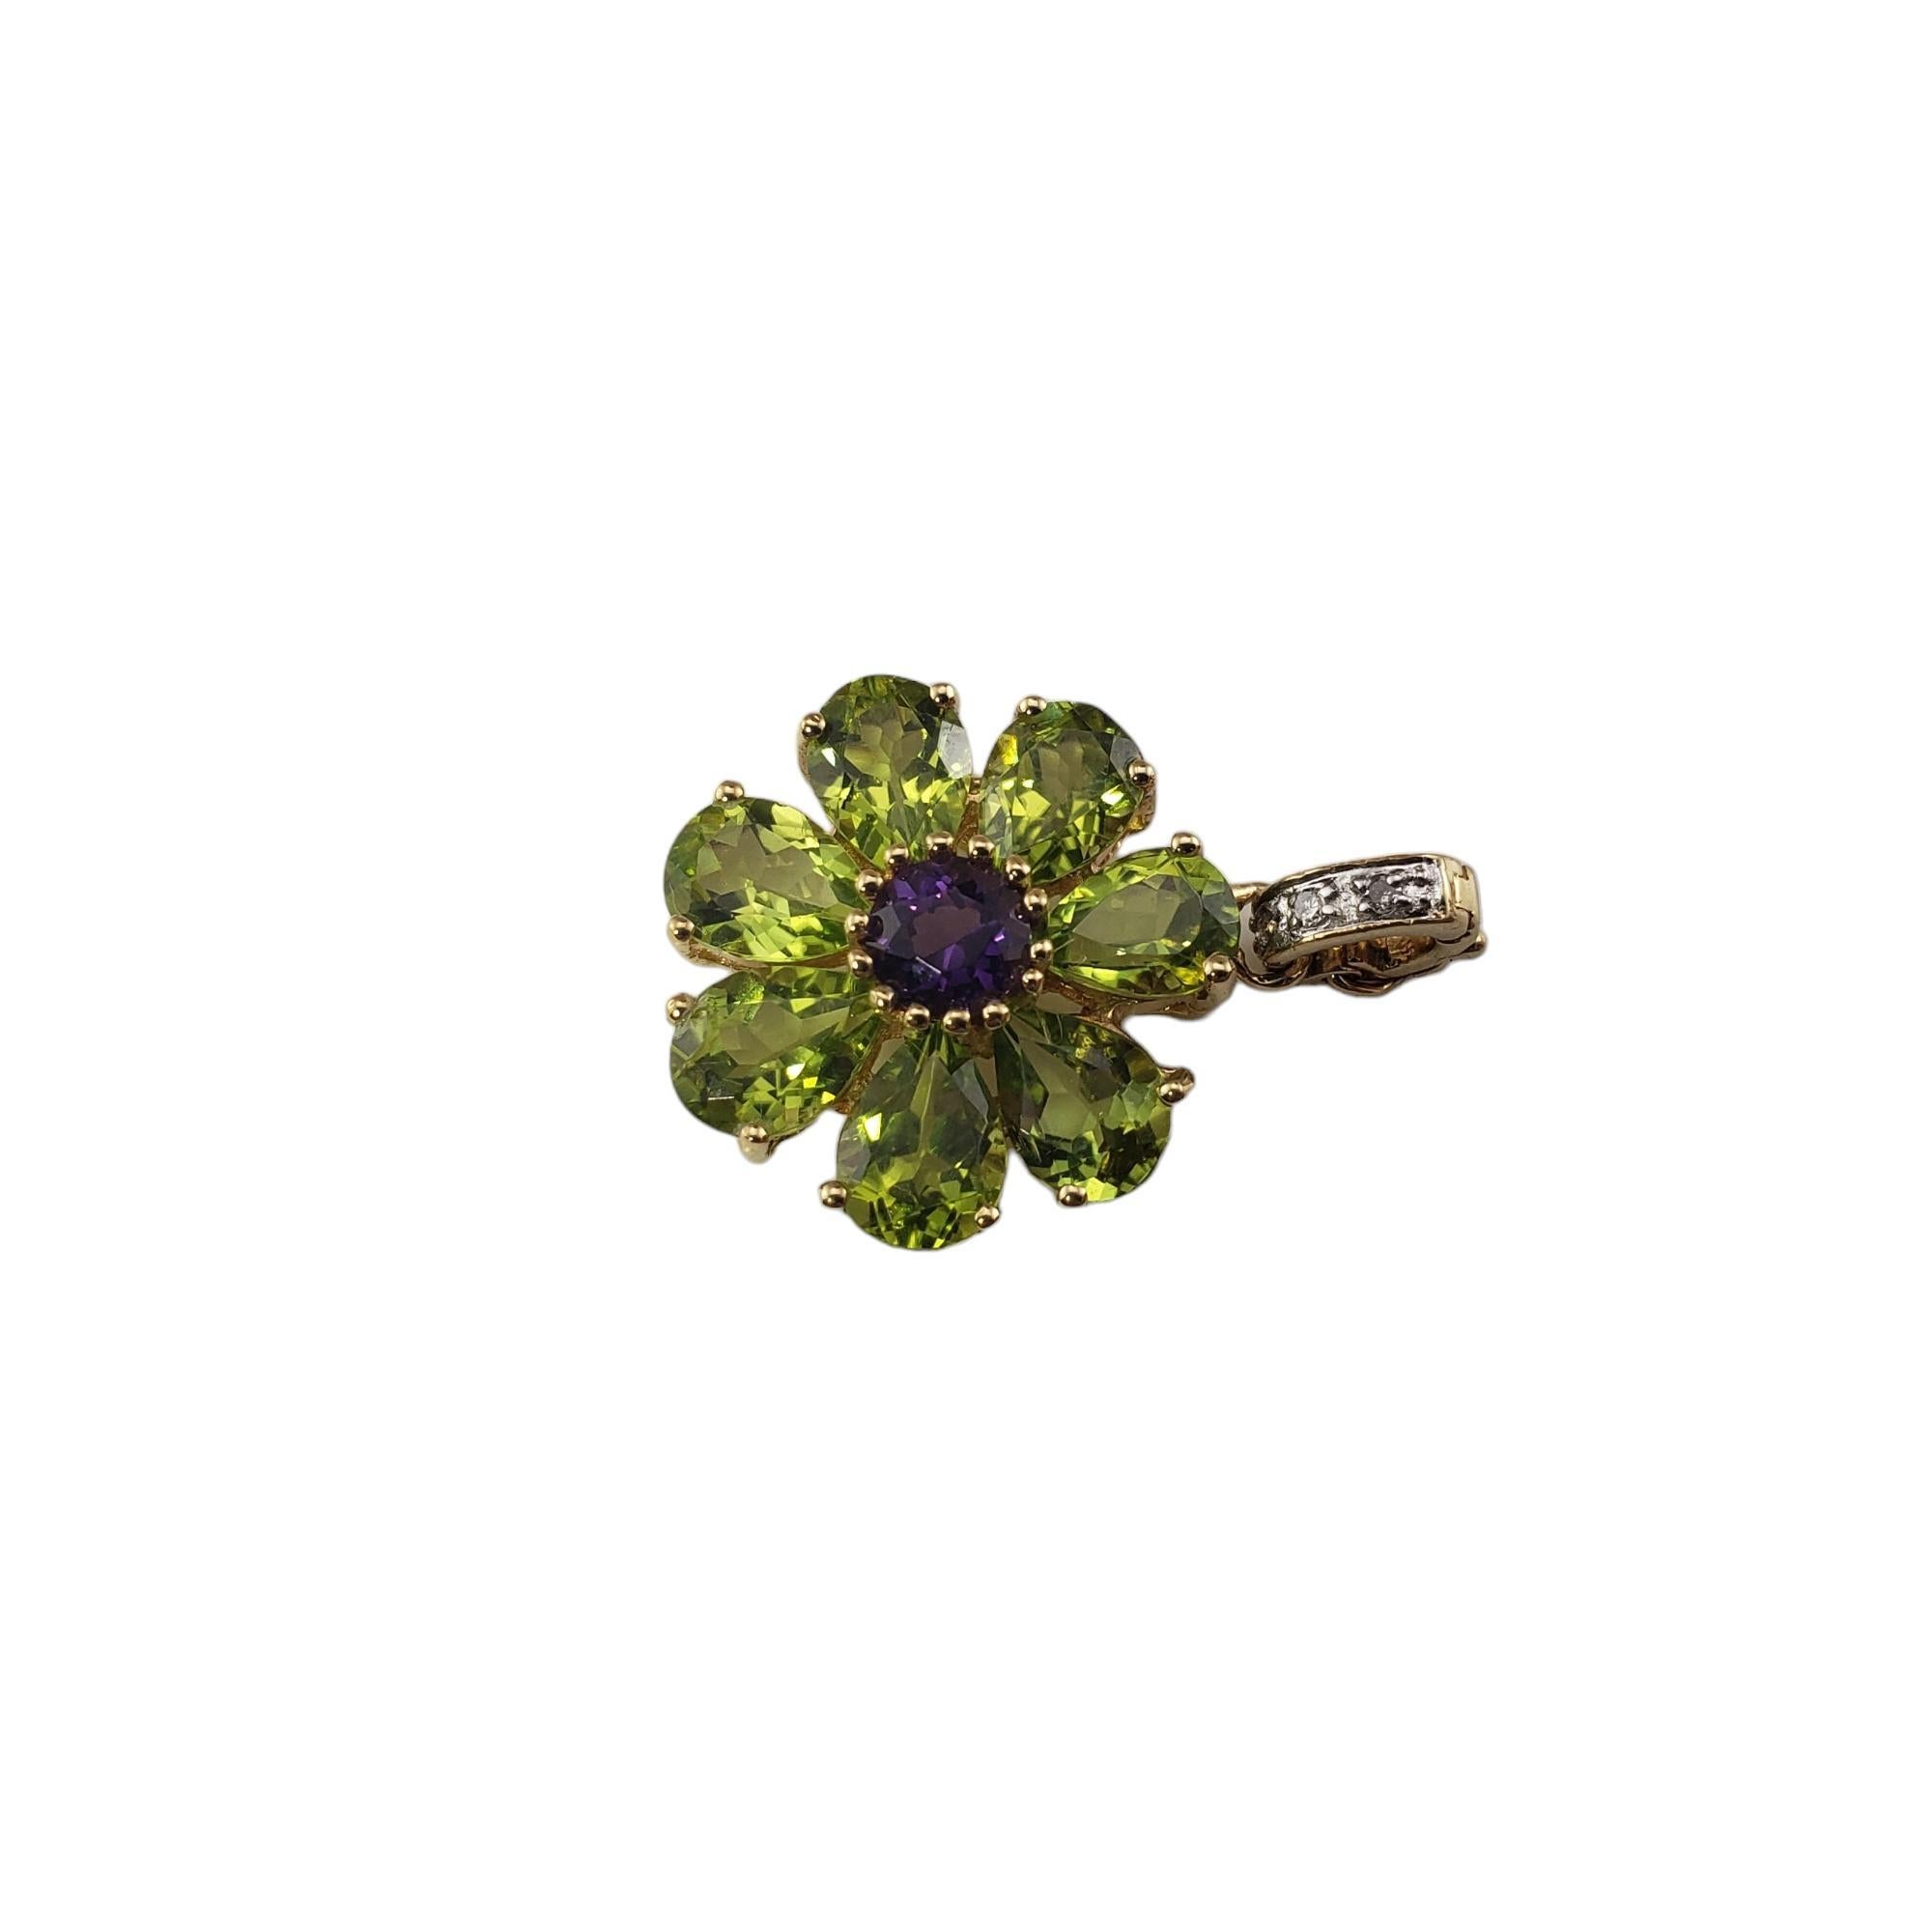 14 Karat Yellow Gold Peridot and Amethyst Flower Enhancer

This elegant enhancer features six peridot gemstones, one amethyst and three round single cut diamonds set in a lovely flower design.

Approximate total diamond weight:   .02 ct.

Diamond